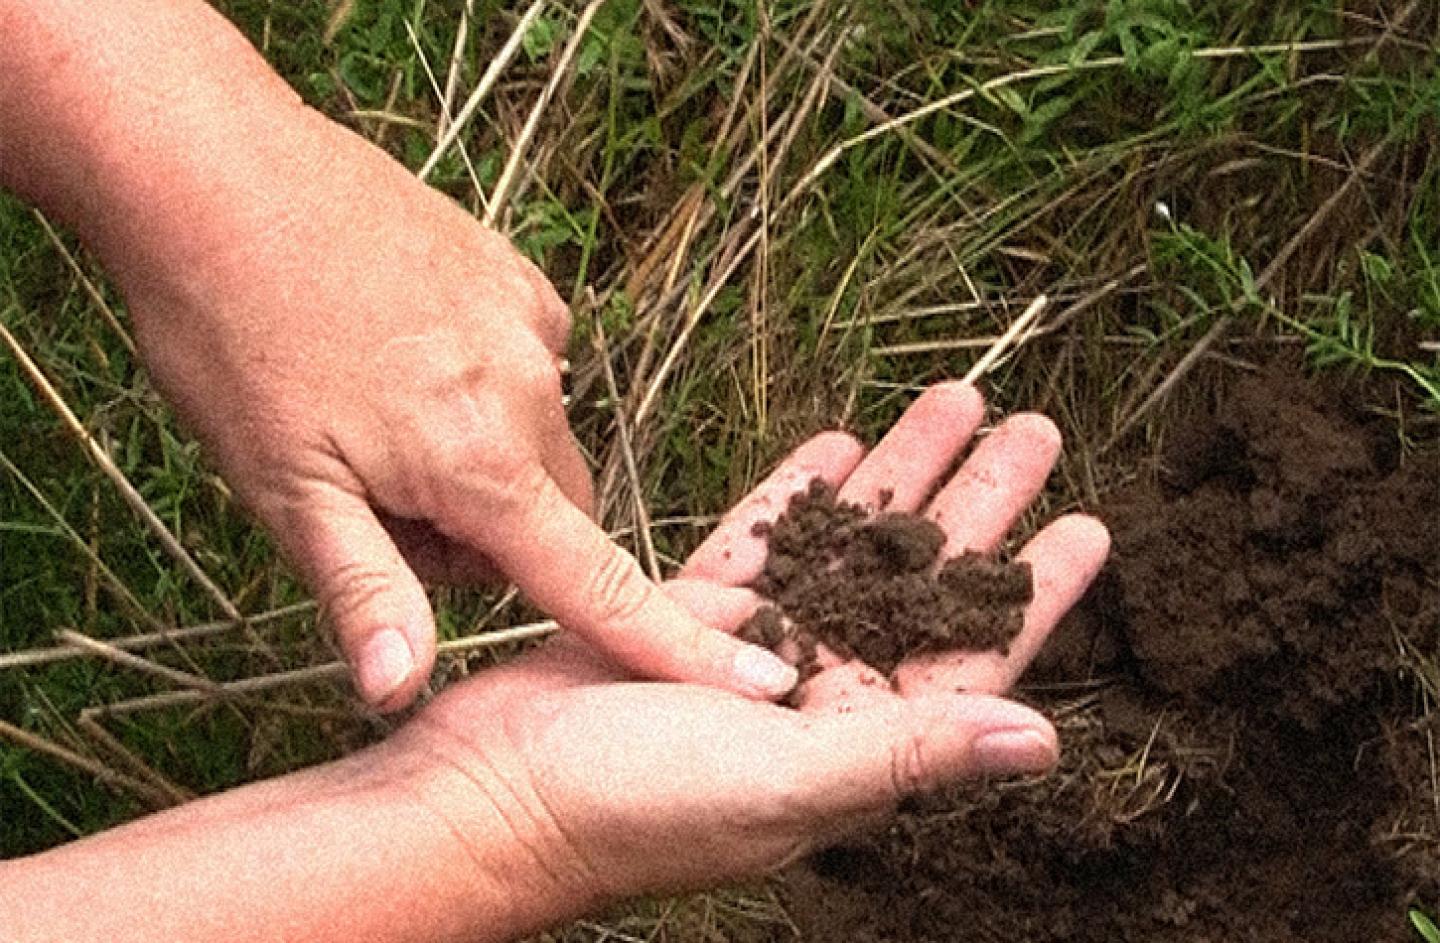 A handful of soil is examined.